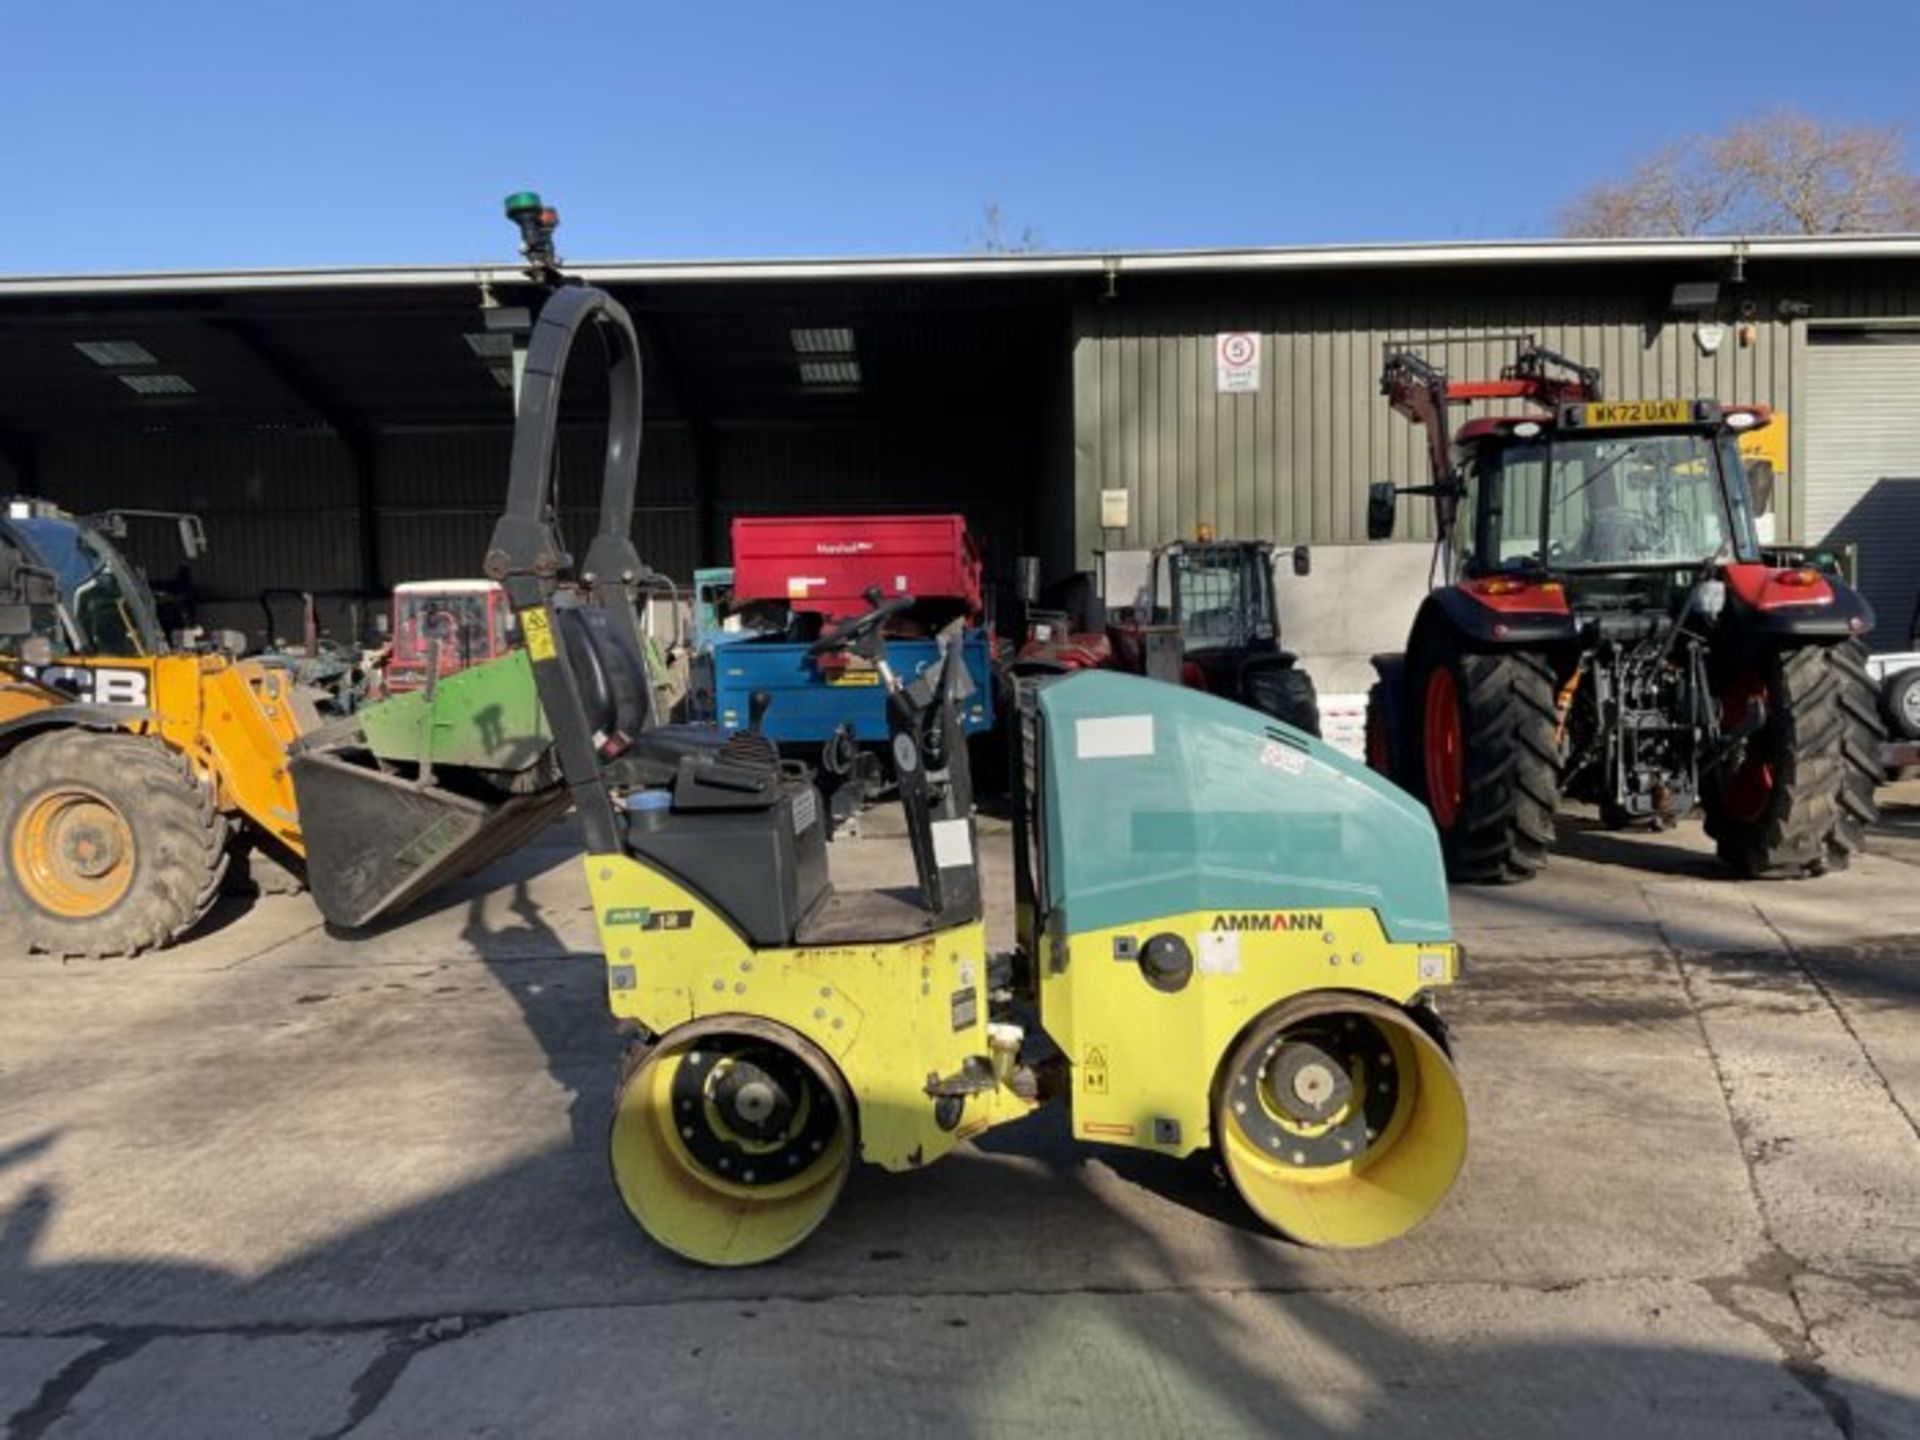 AMMANN ARX12 TANDEM ROLLER 441 HOURS YEAR 2017 - Image 6 of 8